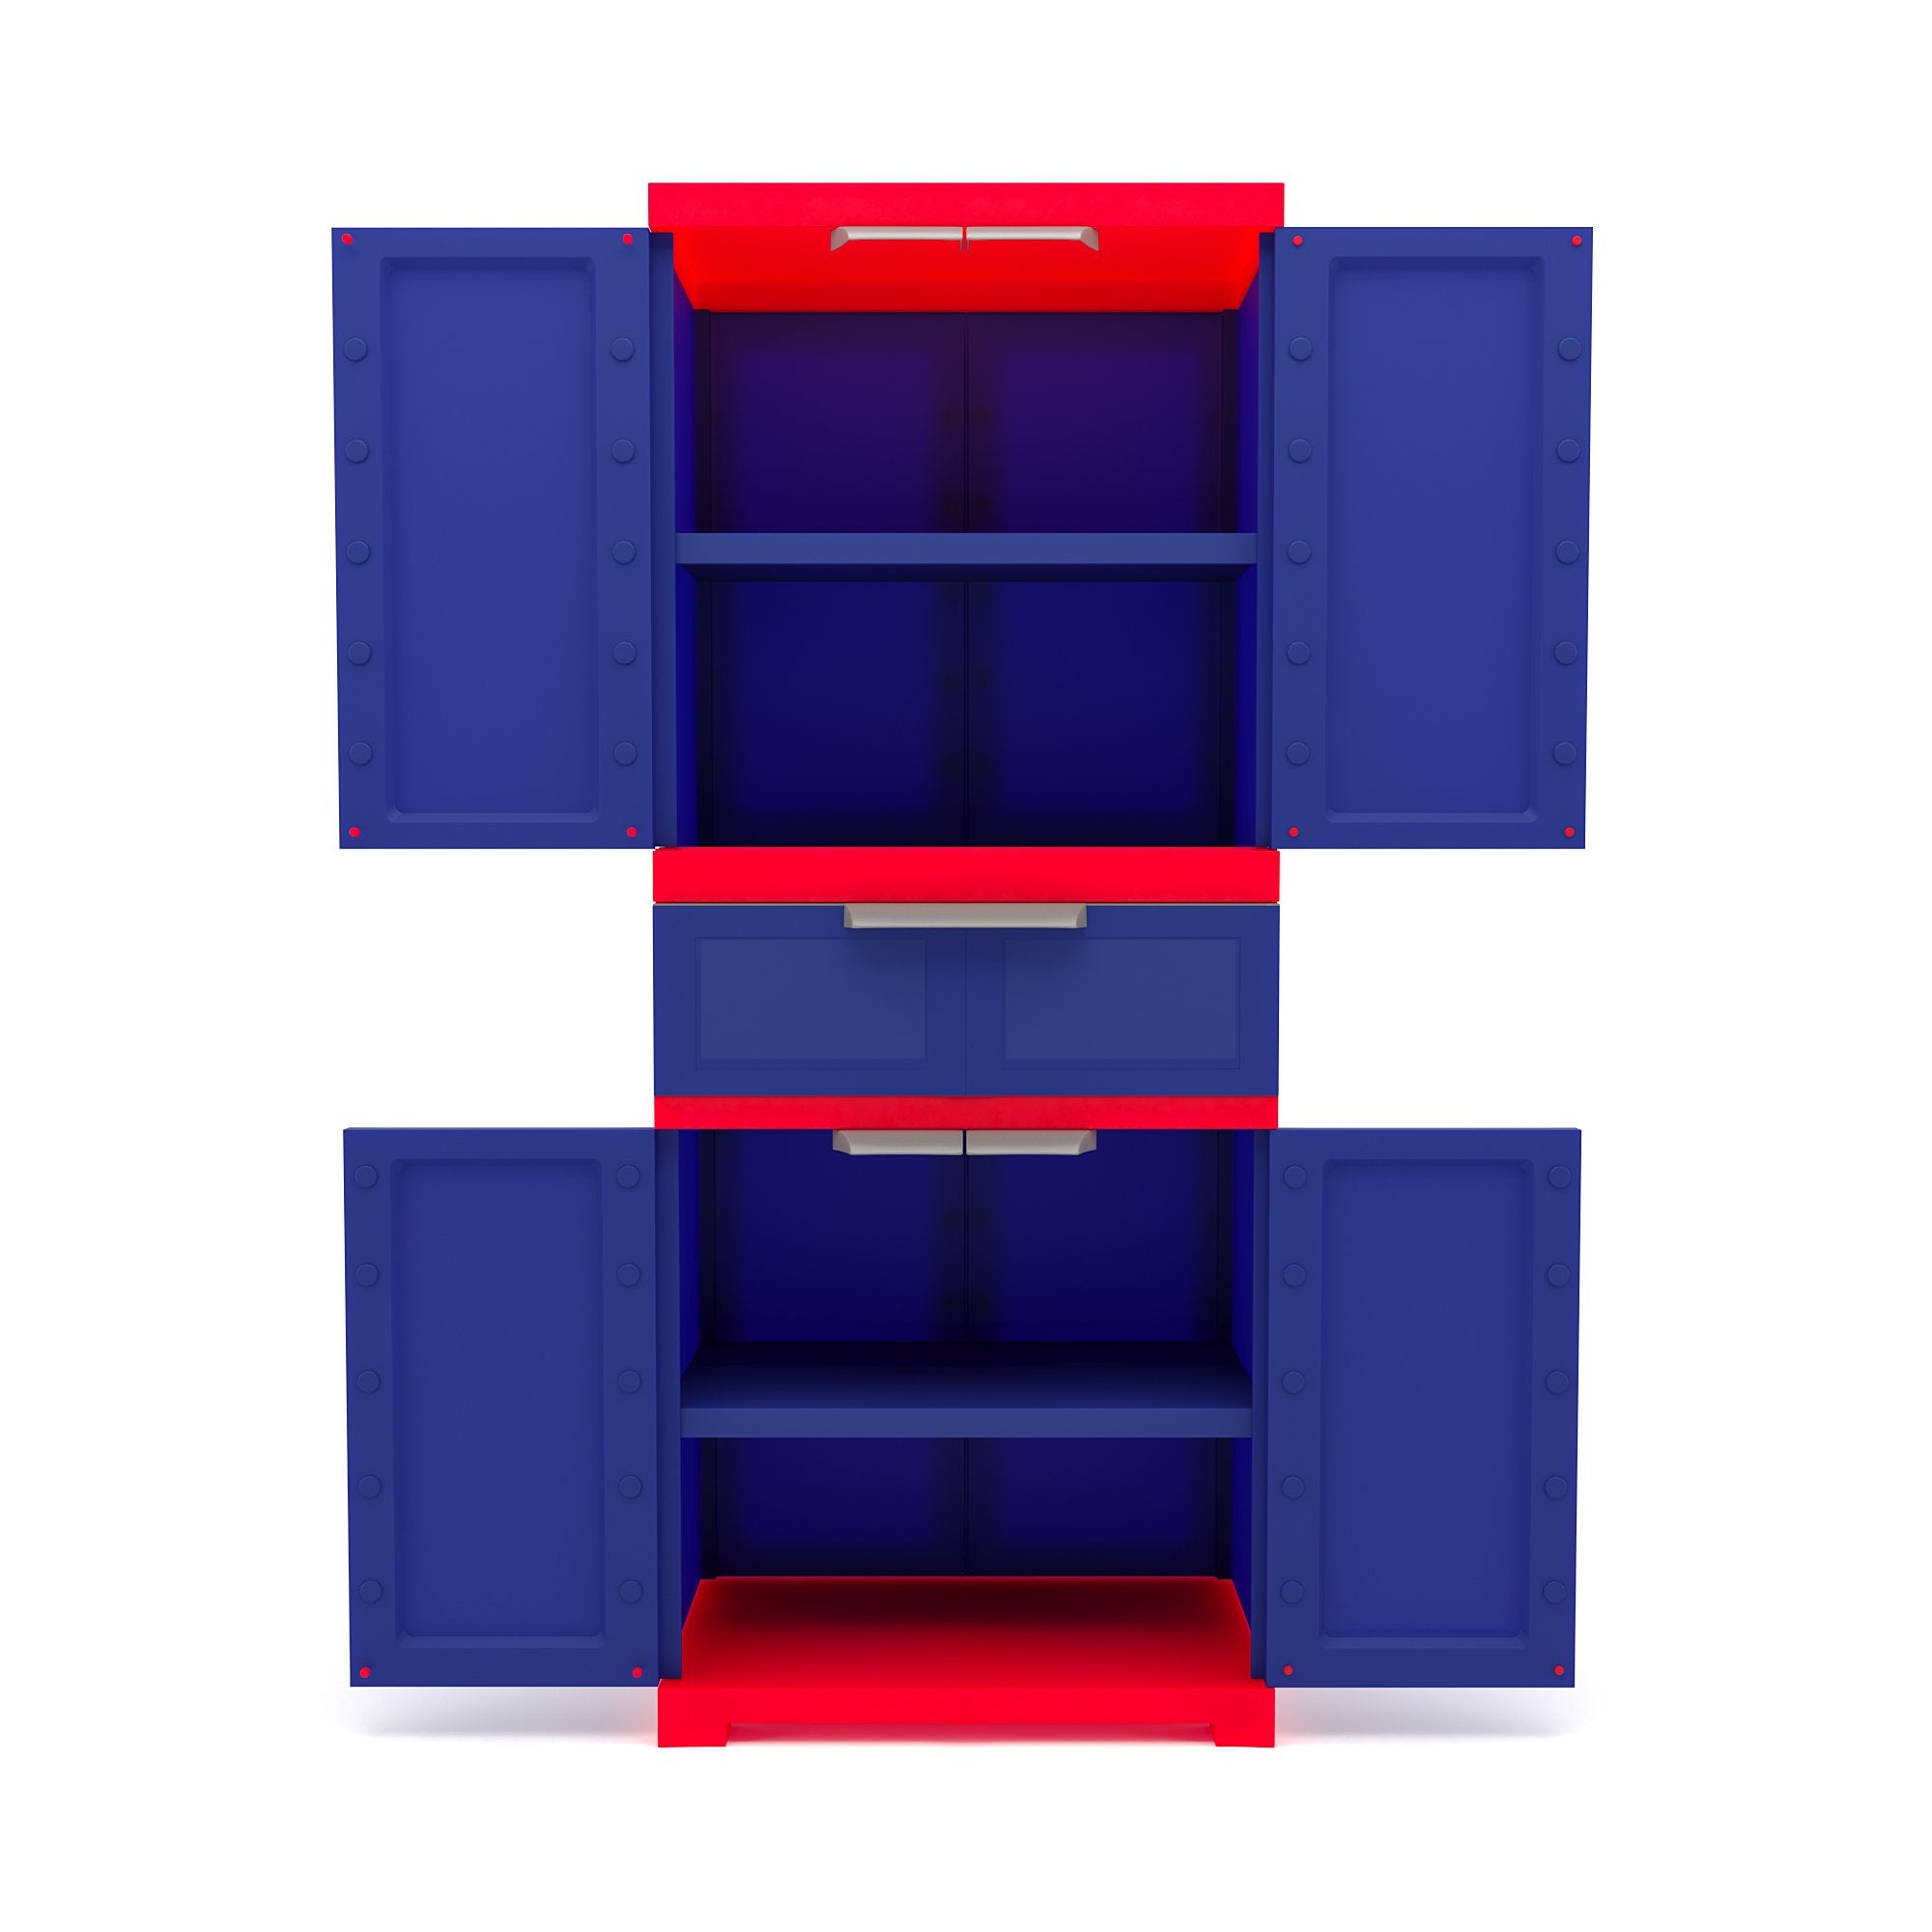 Nilkamal Freedom with 1 Drawer (Pepsi Blue/Bright Red)